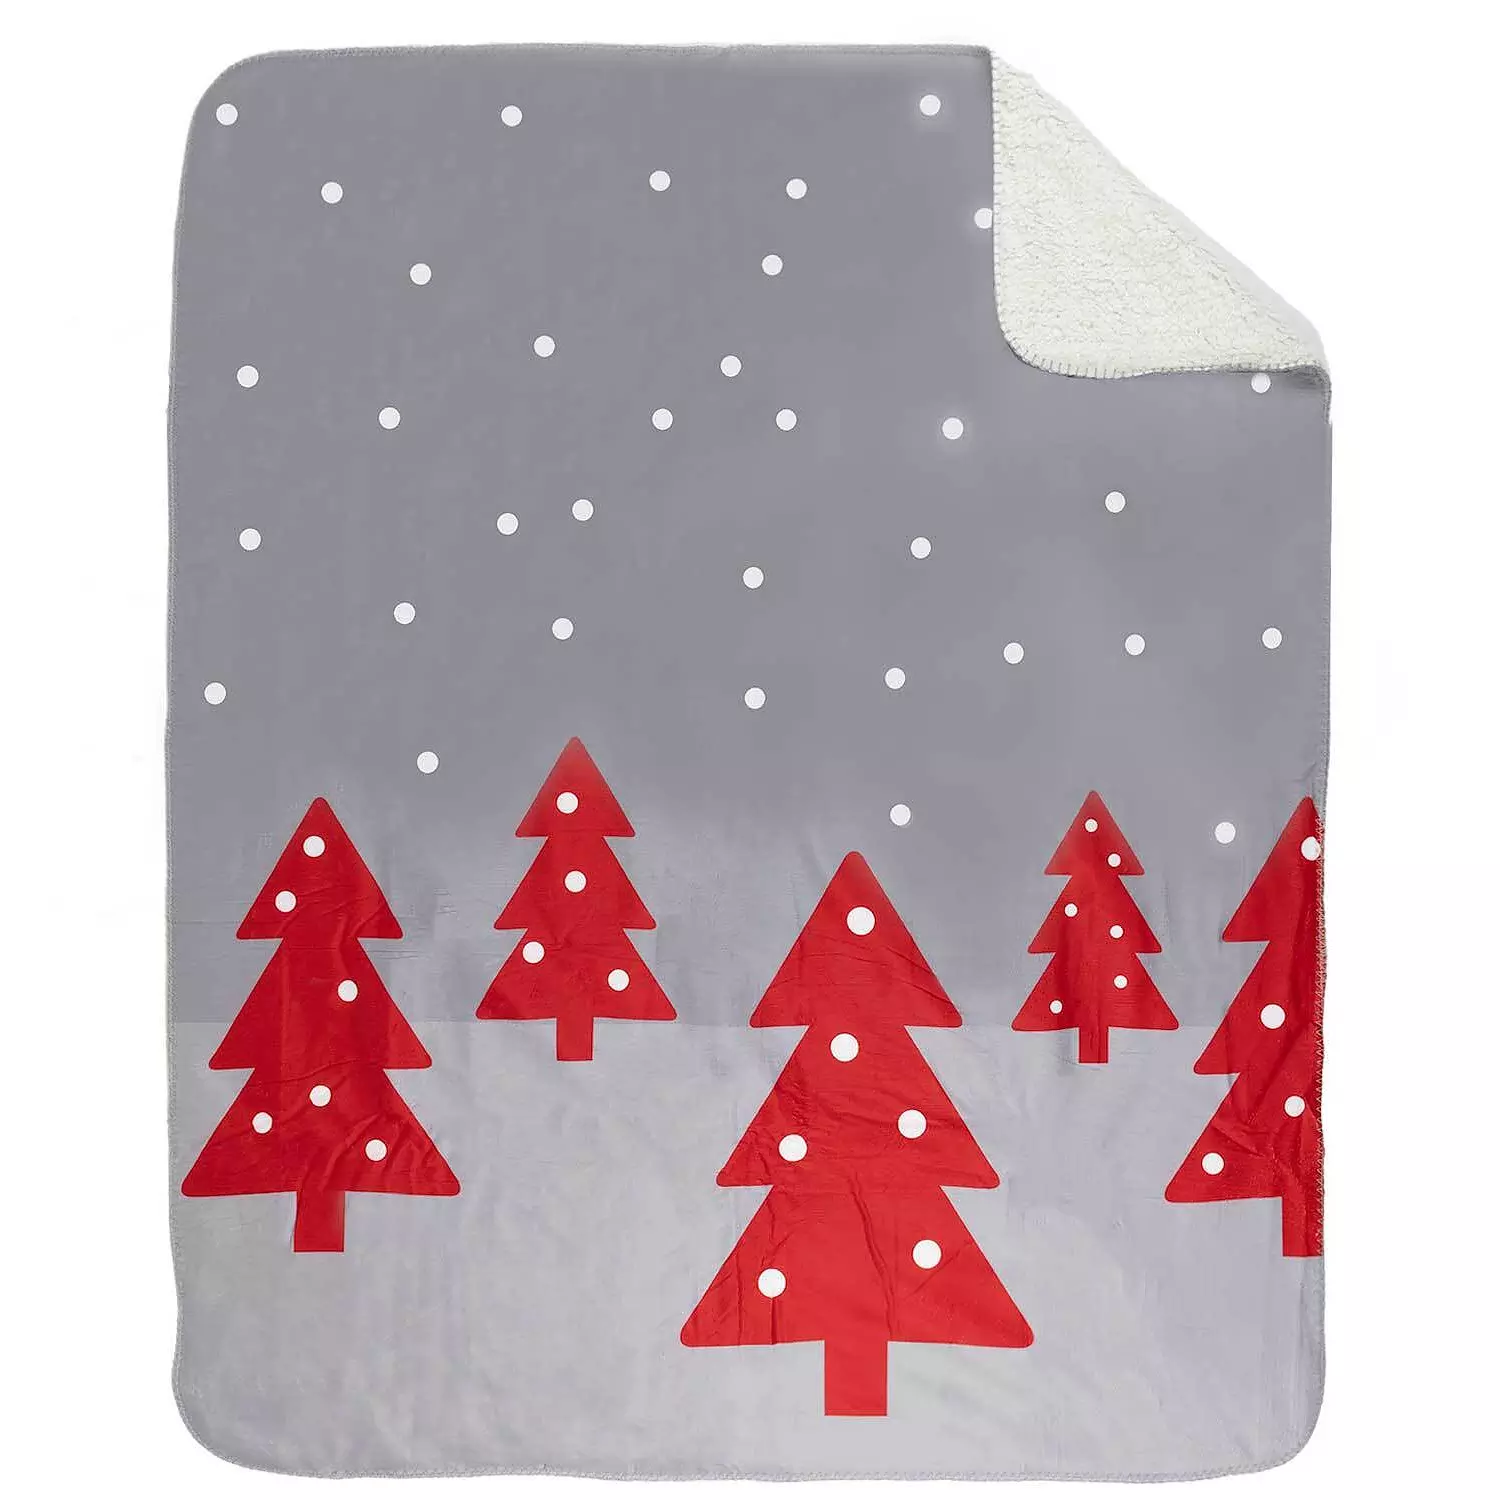 Printed throw with sherpa backing, red Christmas trees, 50"x60"